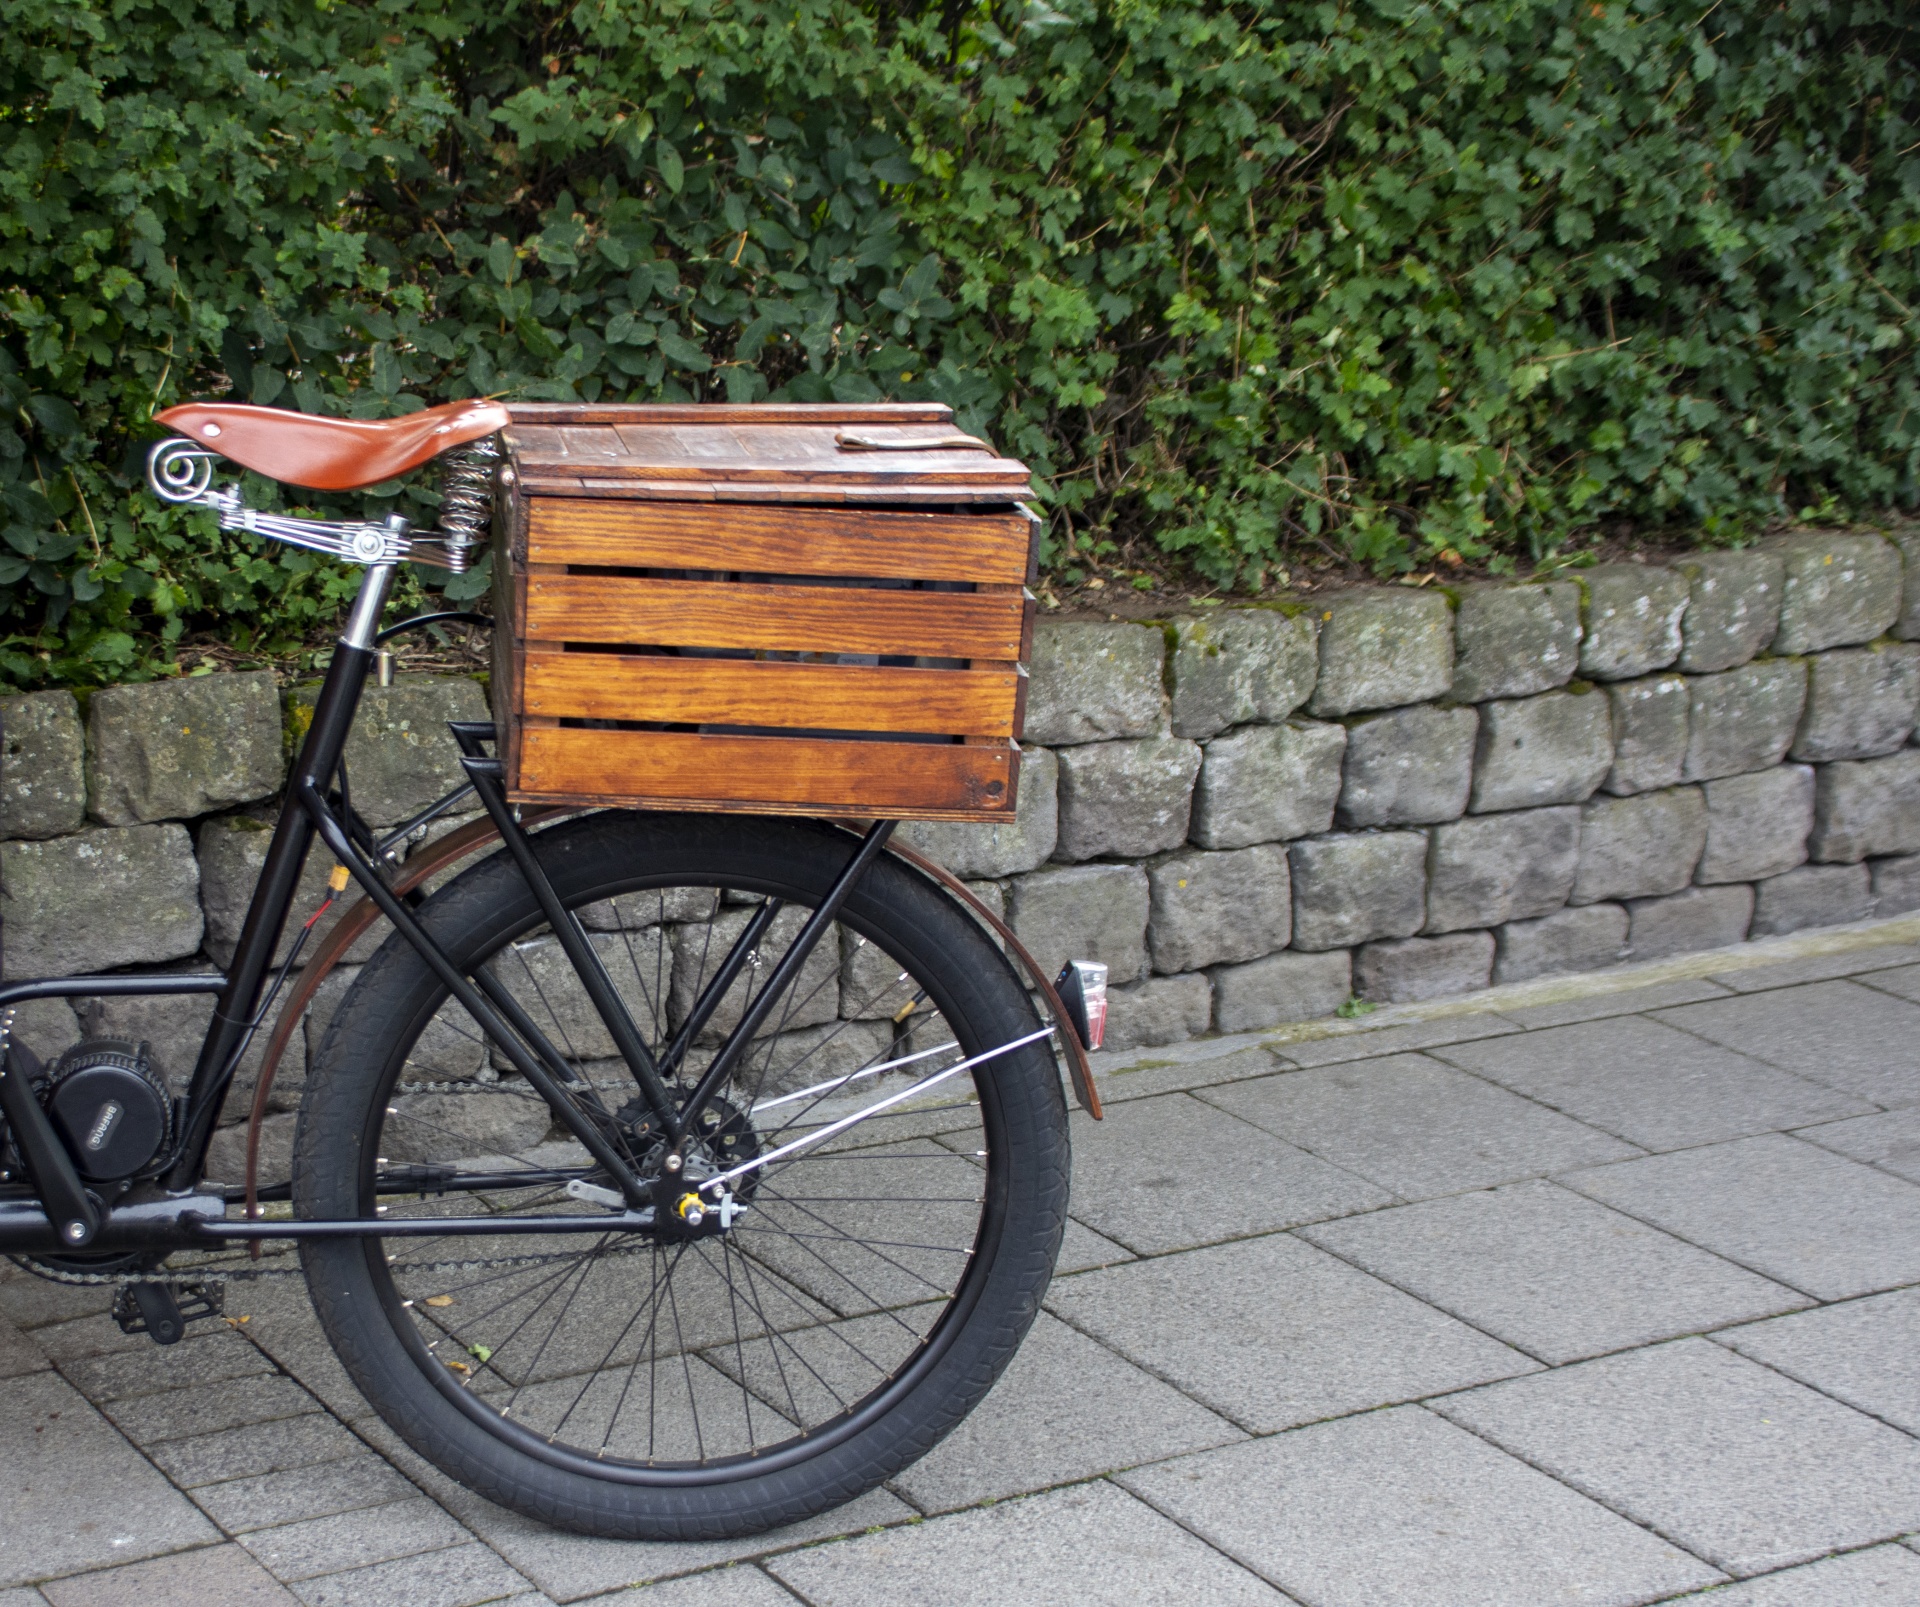 Wooden Crate On Bike